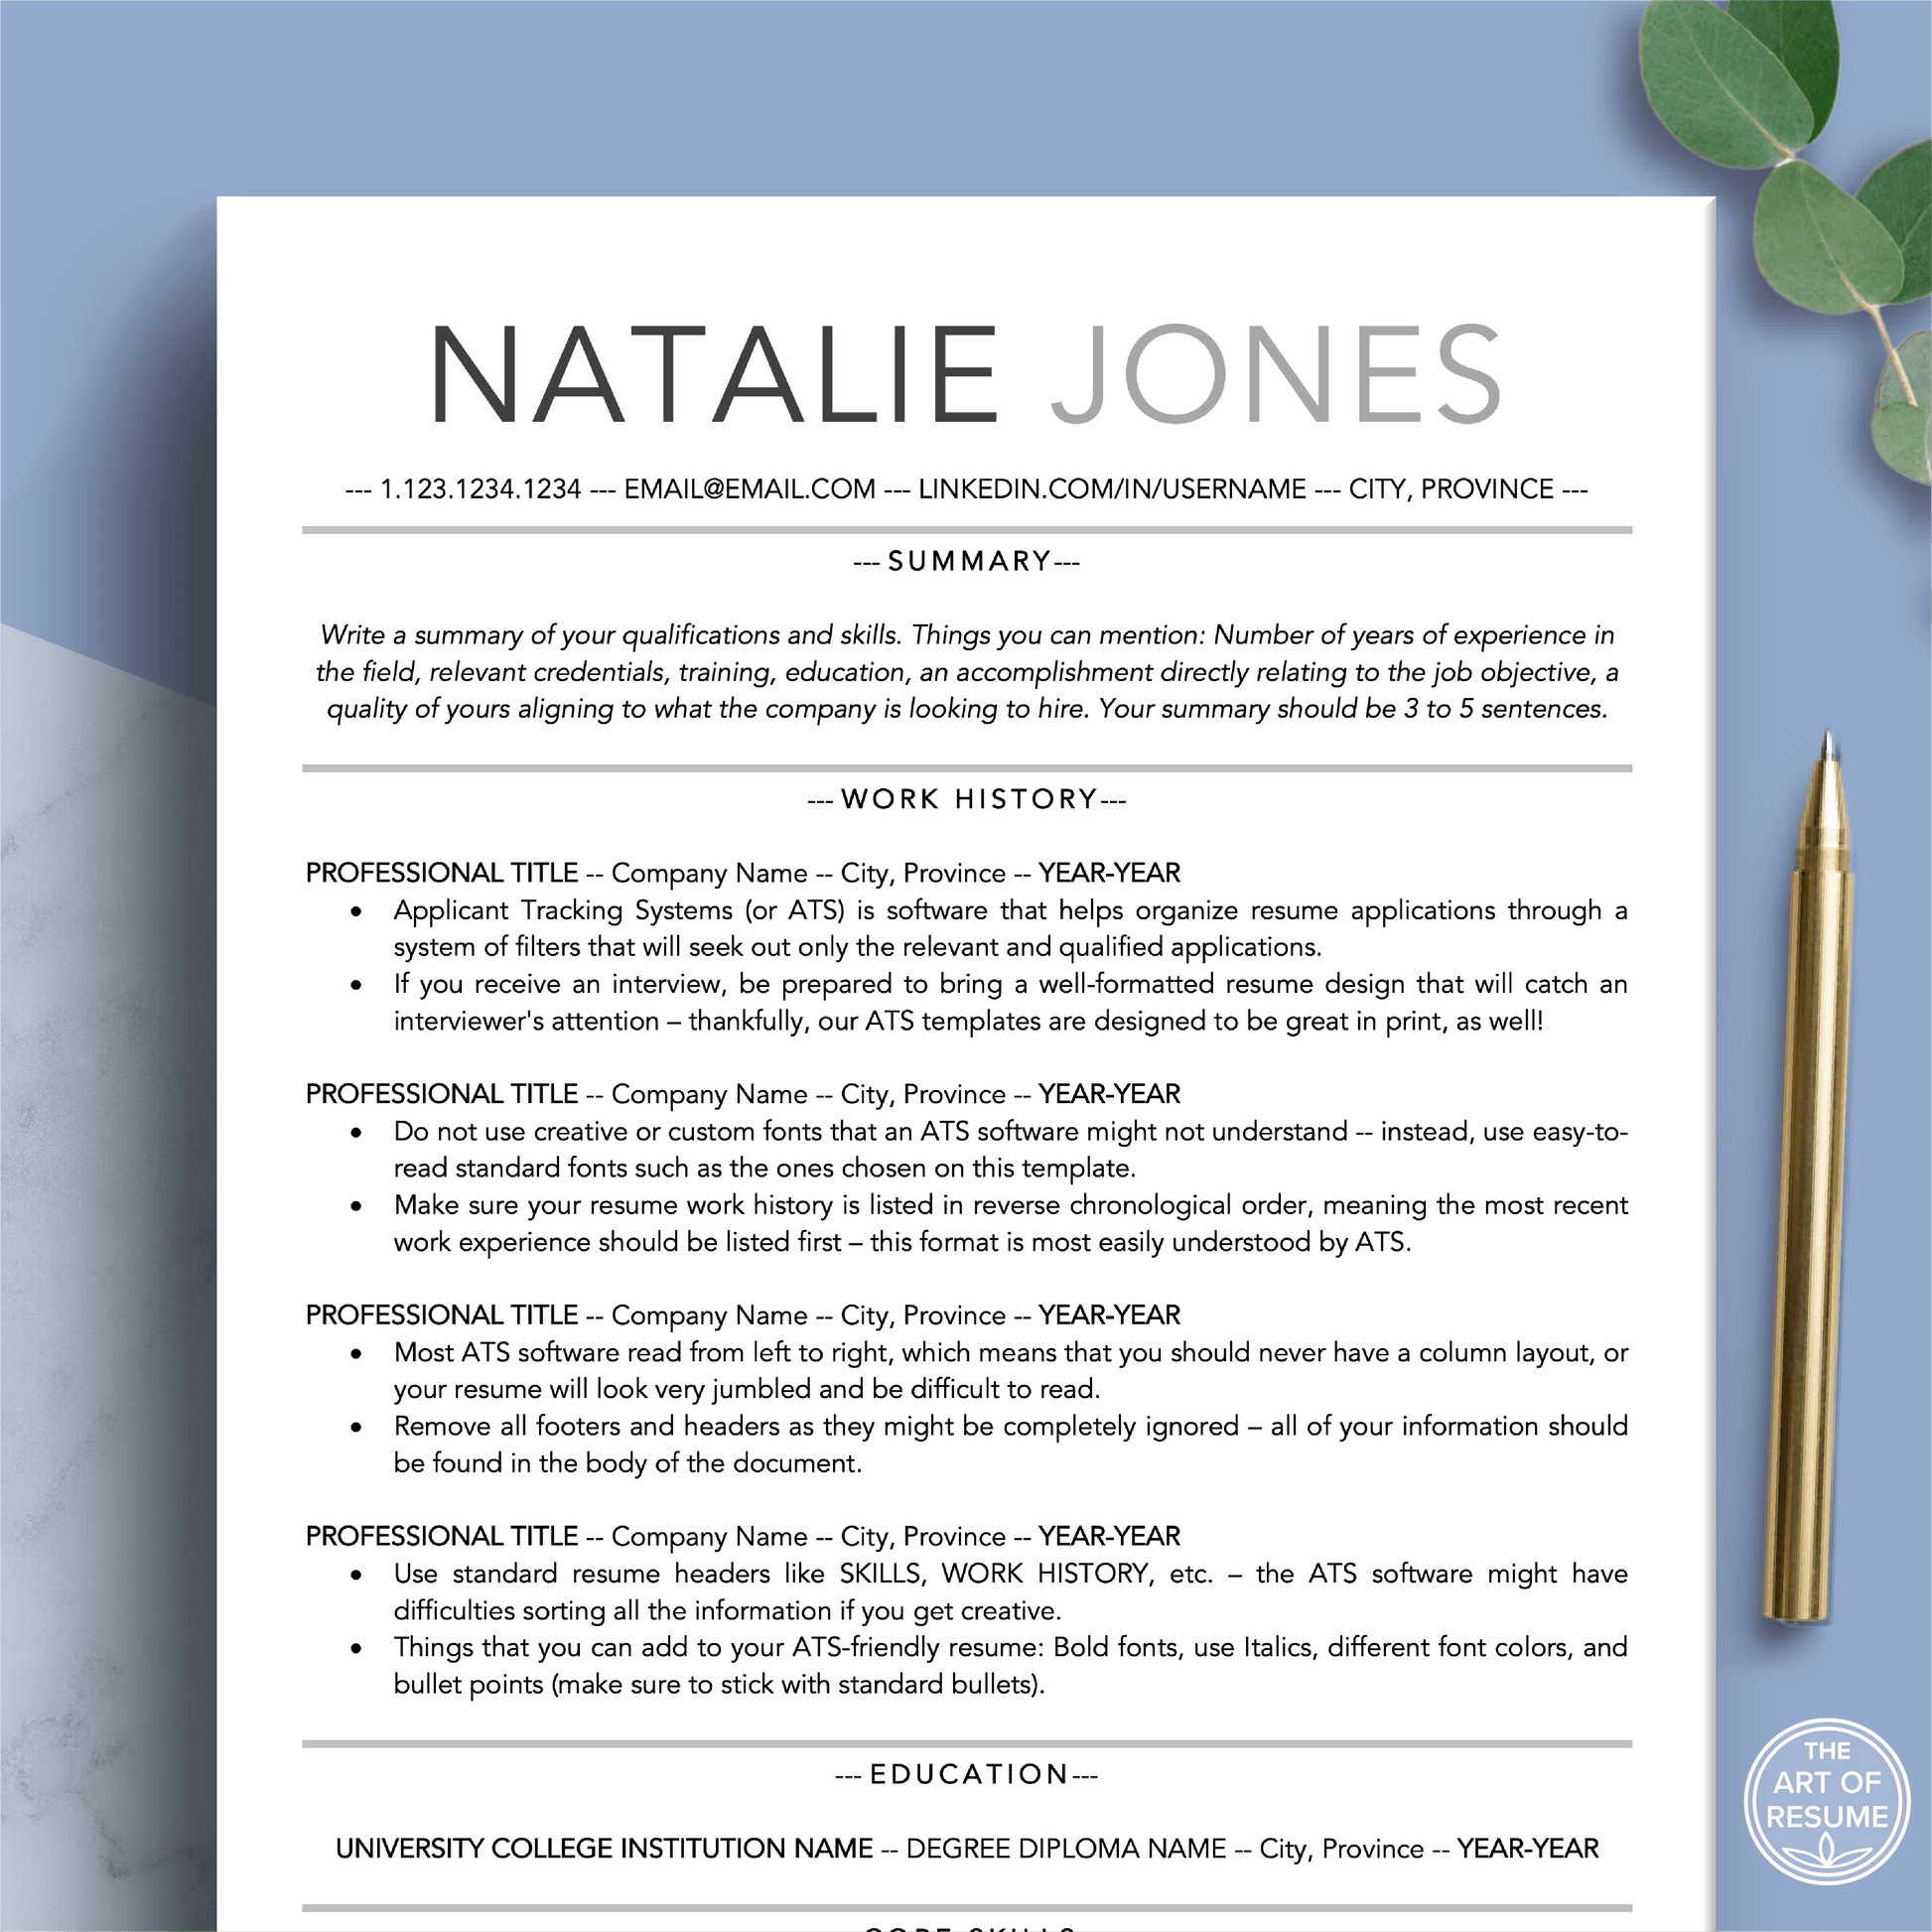 ATS-Friendly Resume | Modern CV Template | FREE Resume Guide - The Art of Resume